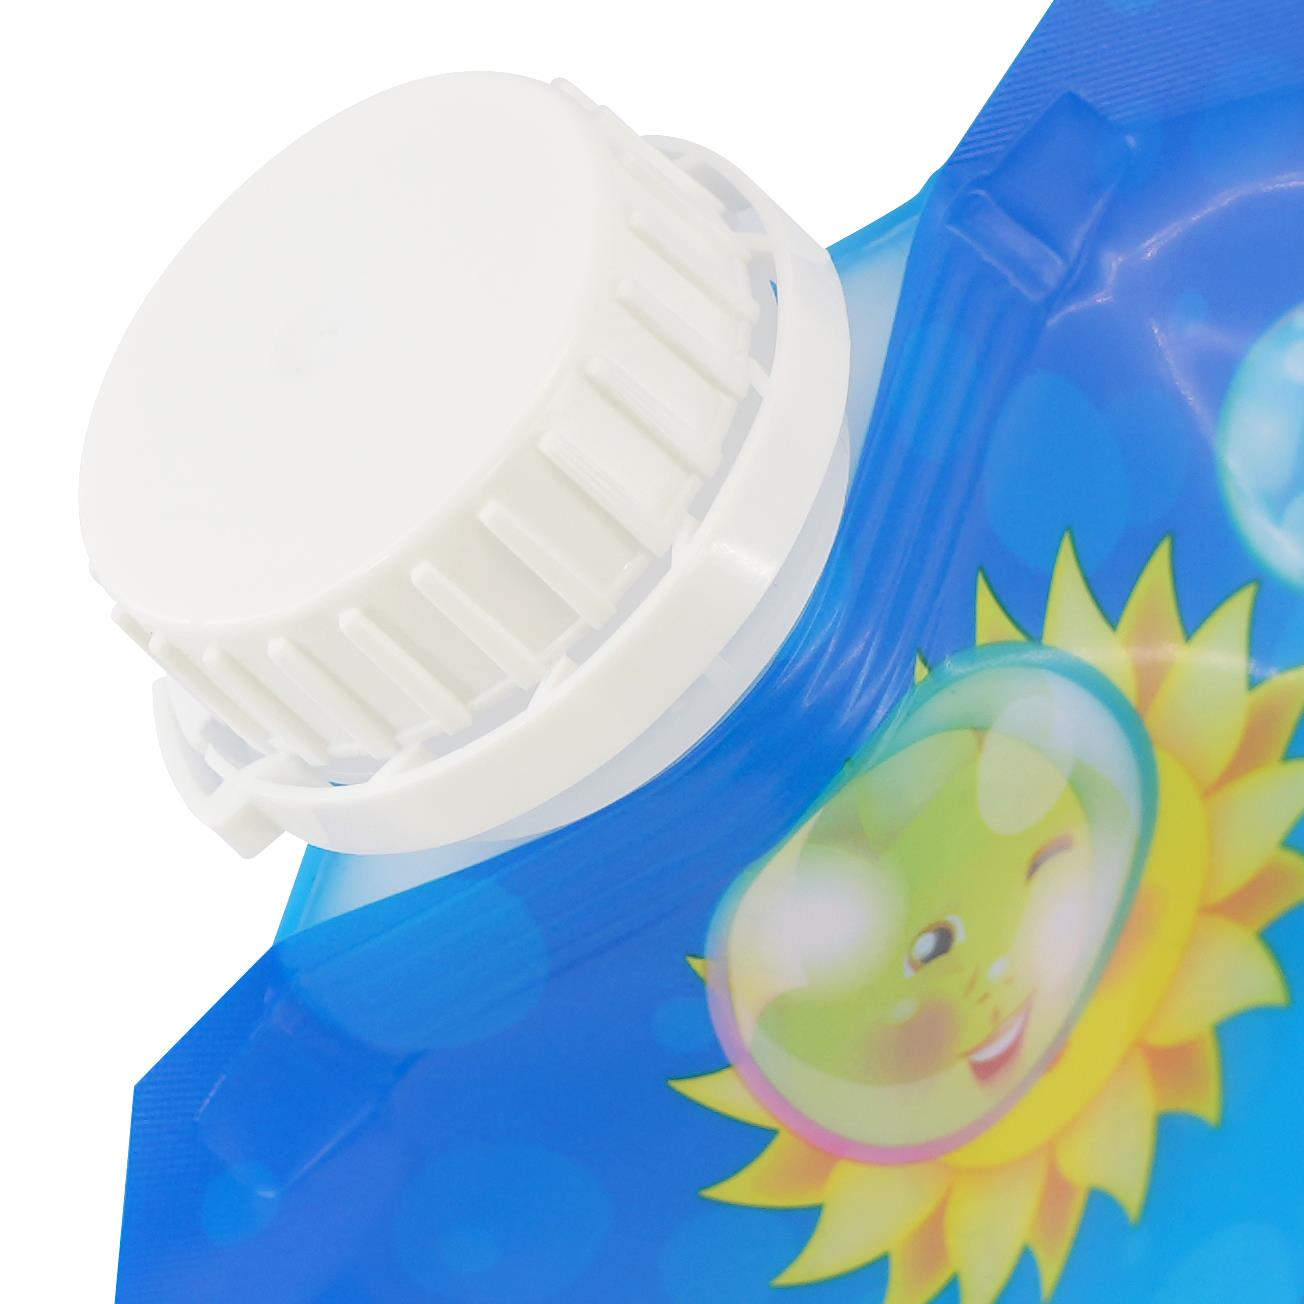 Bubble Blow Maker Concentrate Refill Liquid 200 ML by The Magic Toy Shop - UKBuyZone